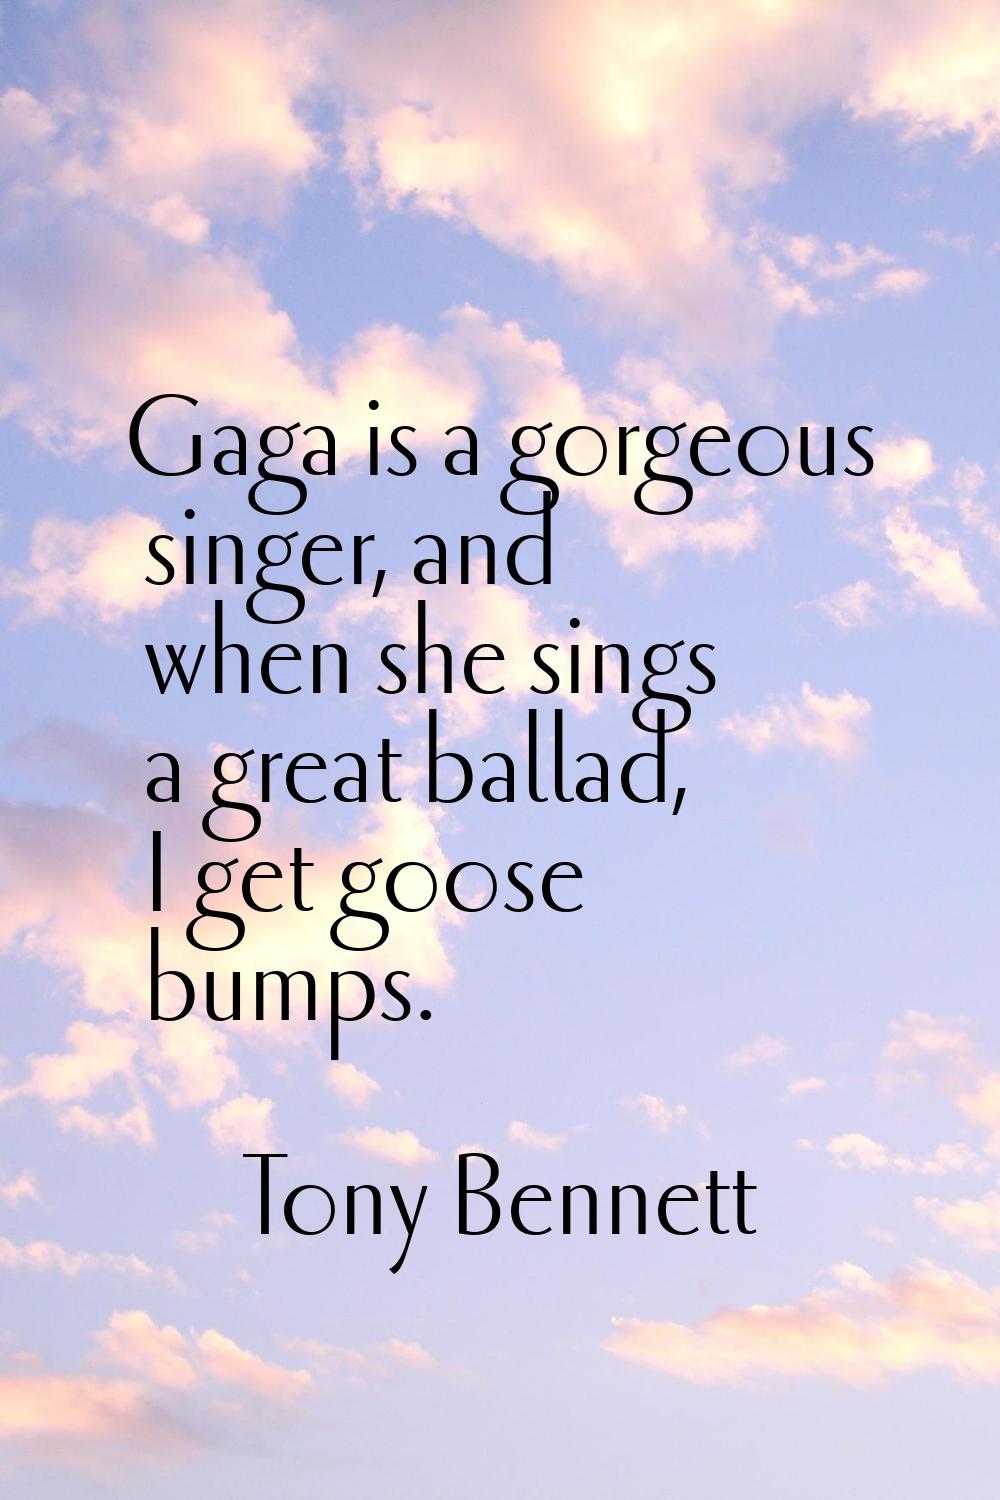 Gaga is a gorgeous singer, and when she sings a great ballad, I get goose bumps.